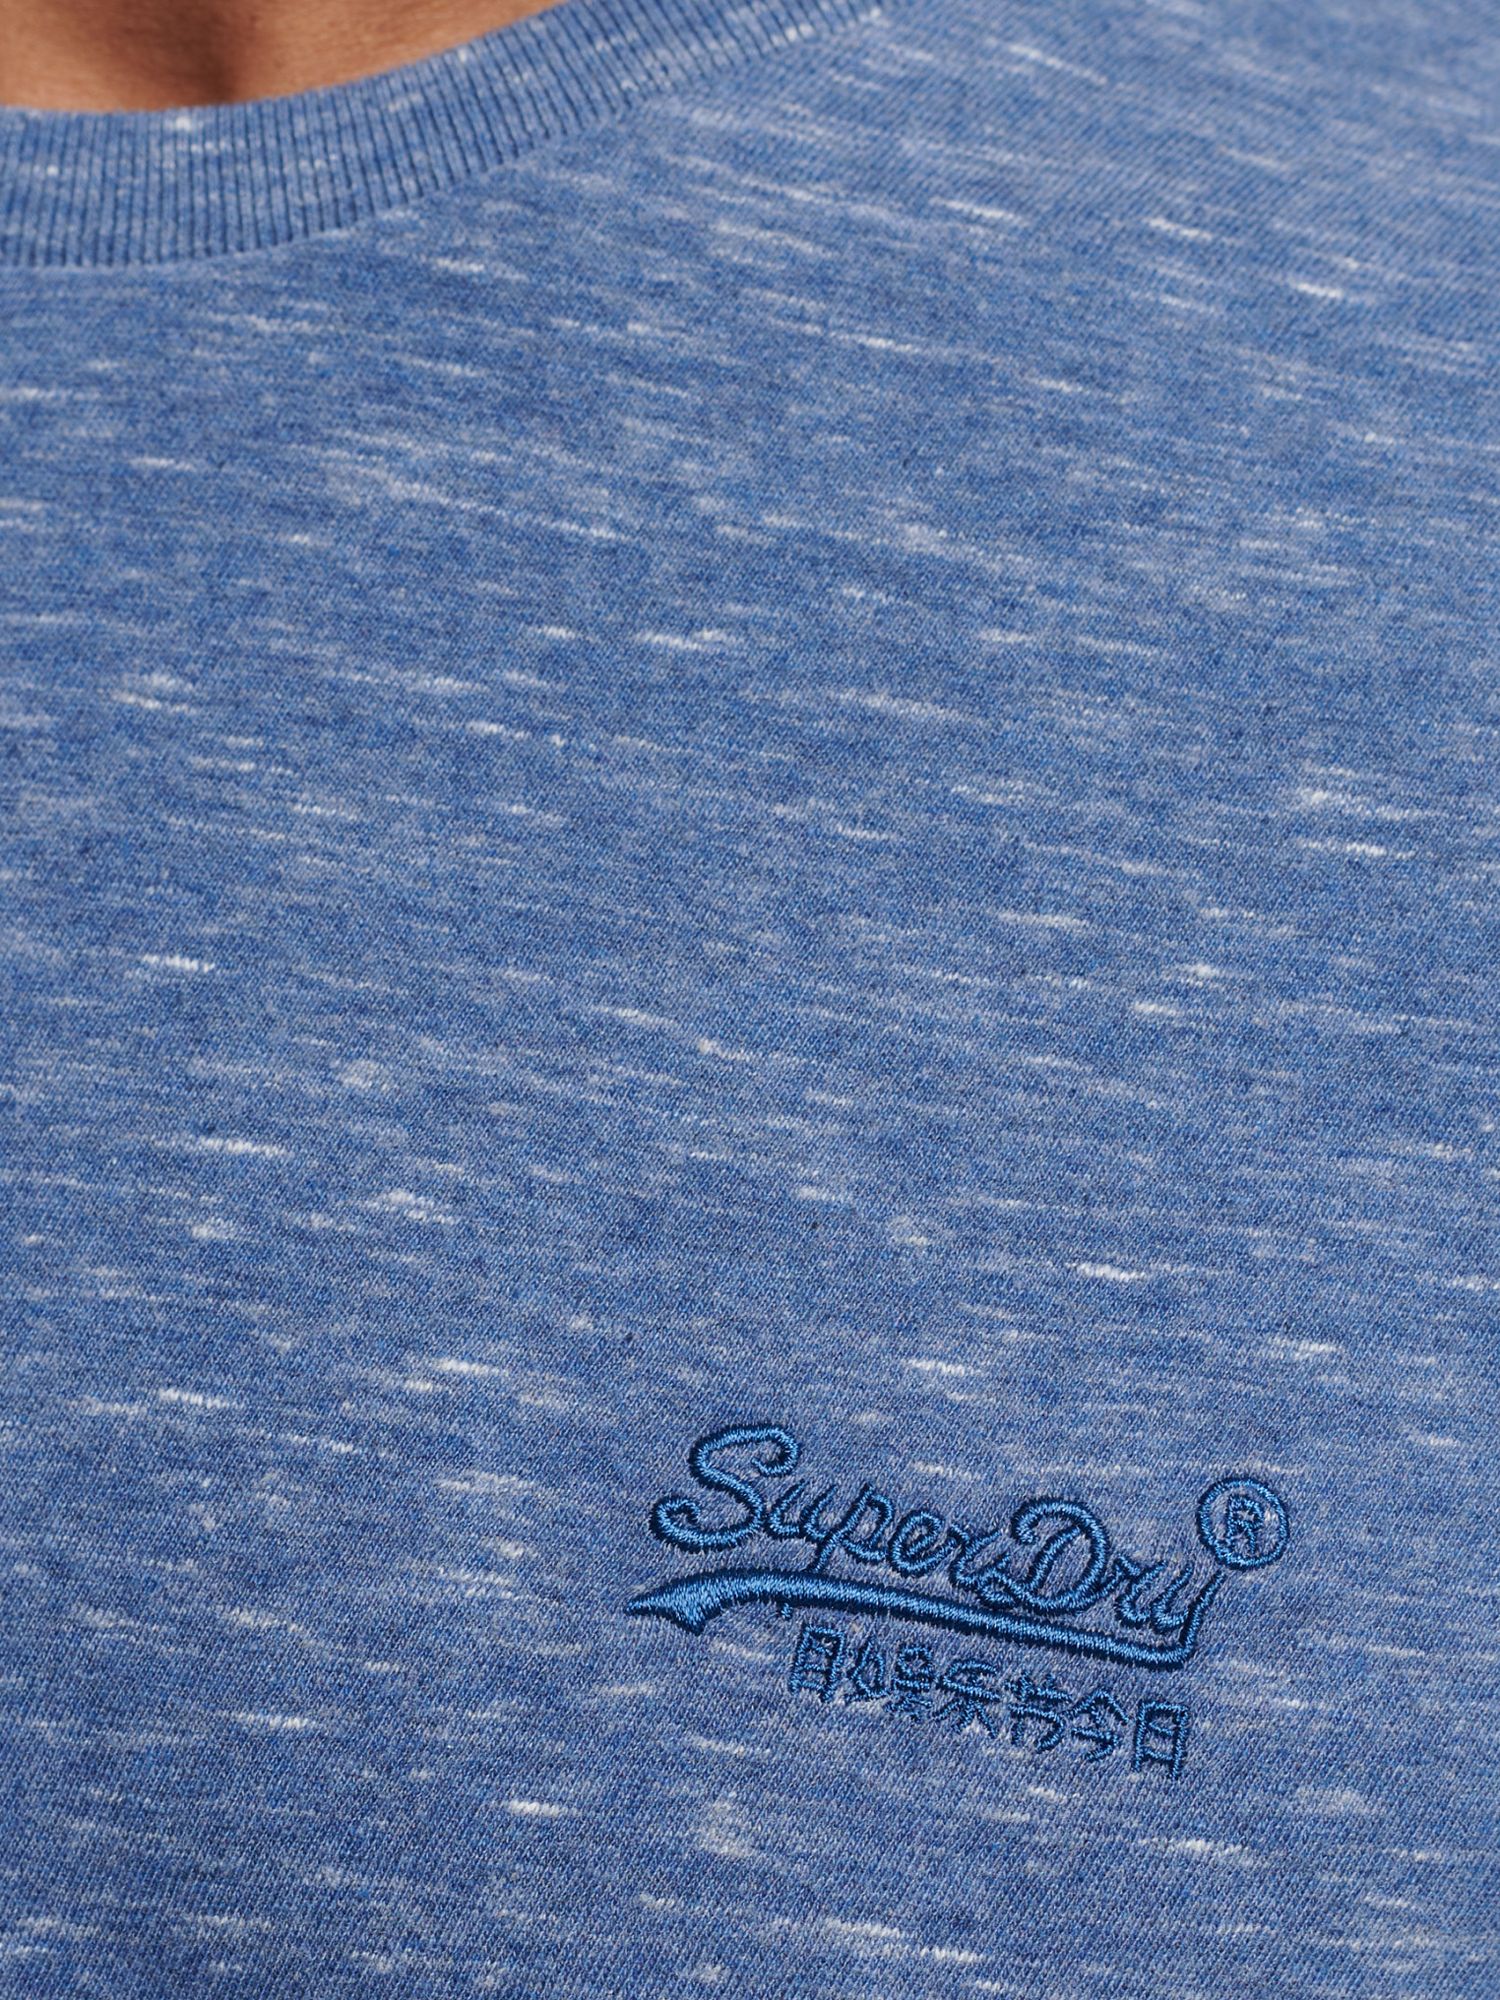 Superdry Organic Cotton Vintage Logo Embroidered T-Shirt, Tidal Blue Spacedye, S